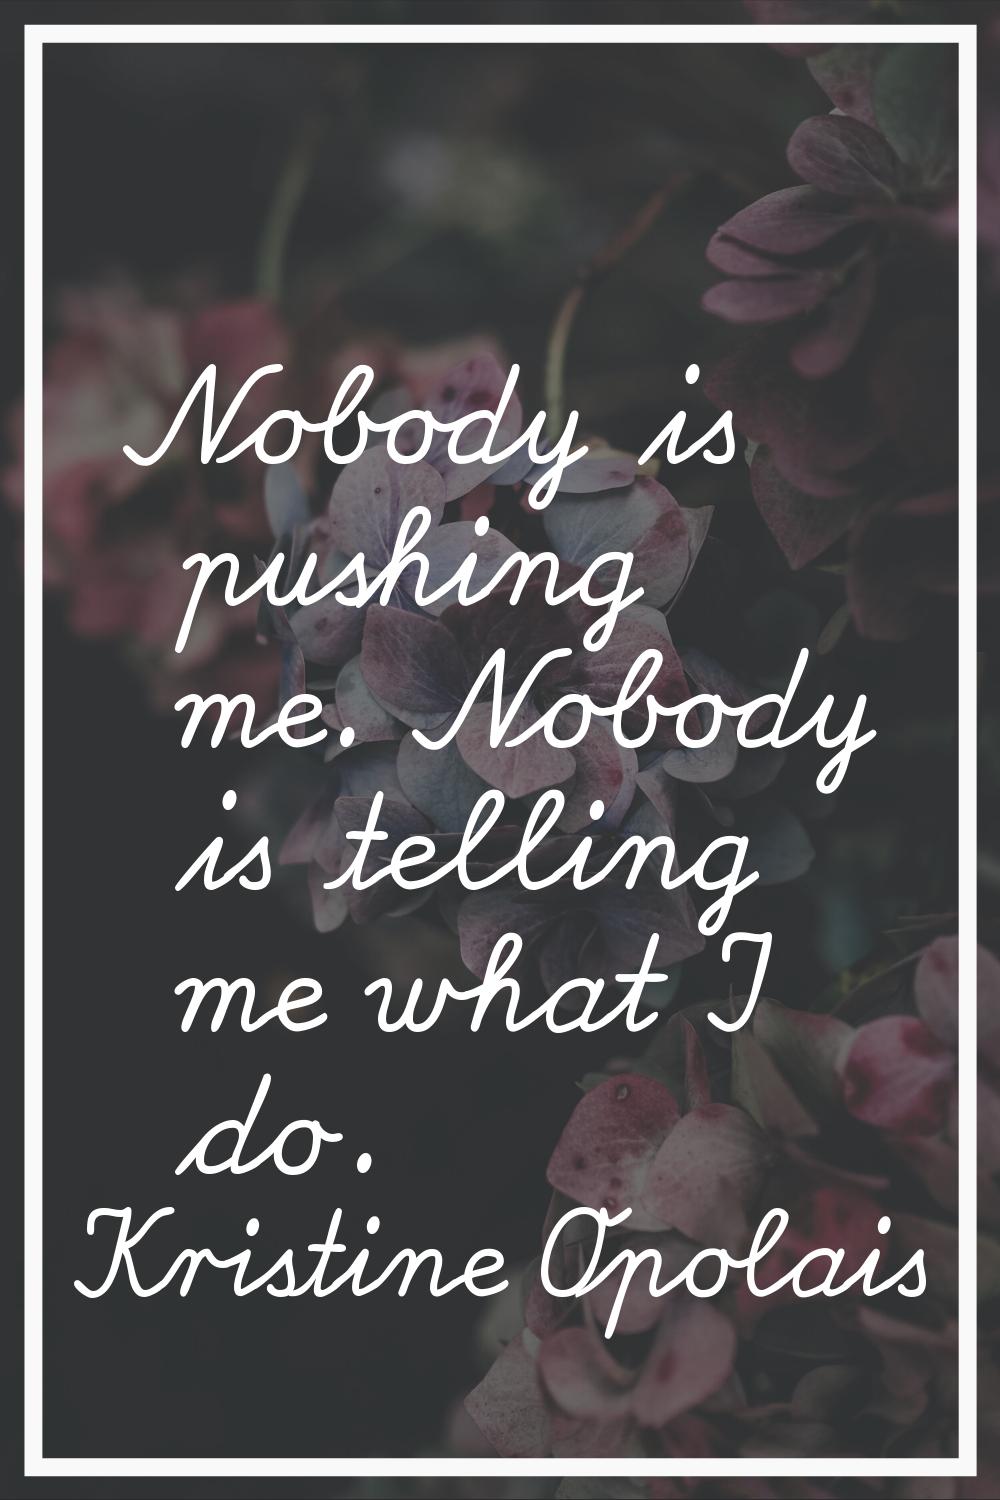 Nobody is pushing me. Nobody is telling me what I do.